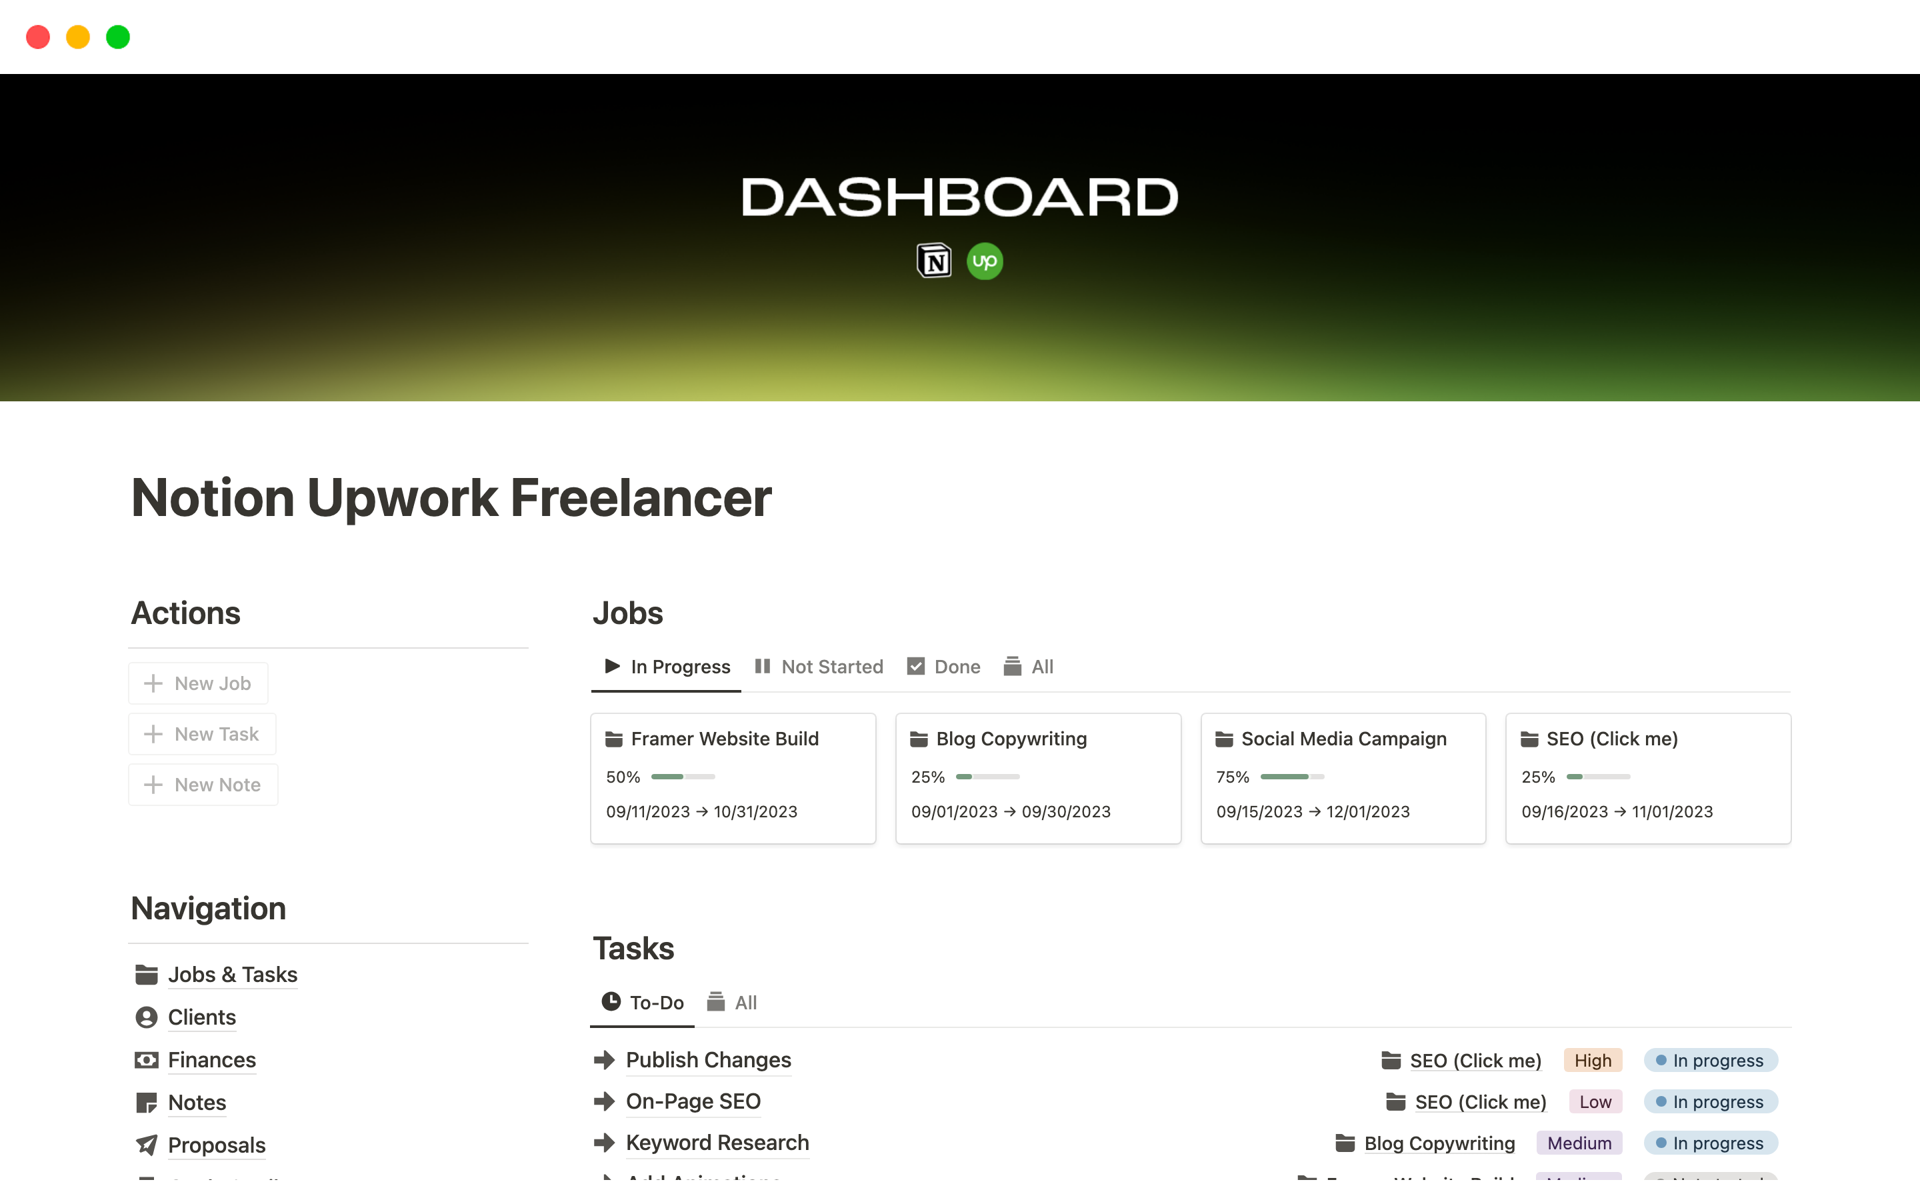 Manage & grow your business as an Upwork freelancer.